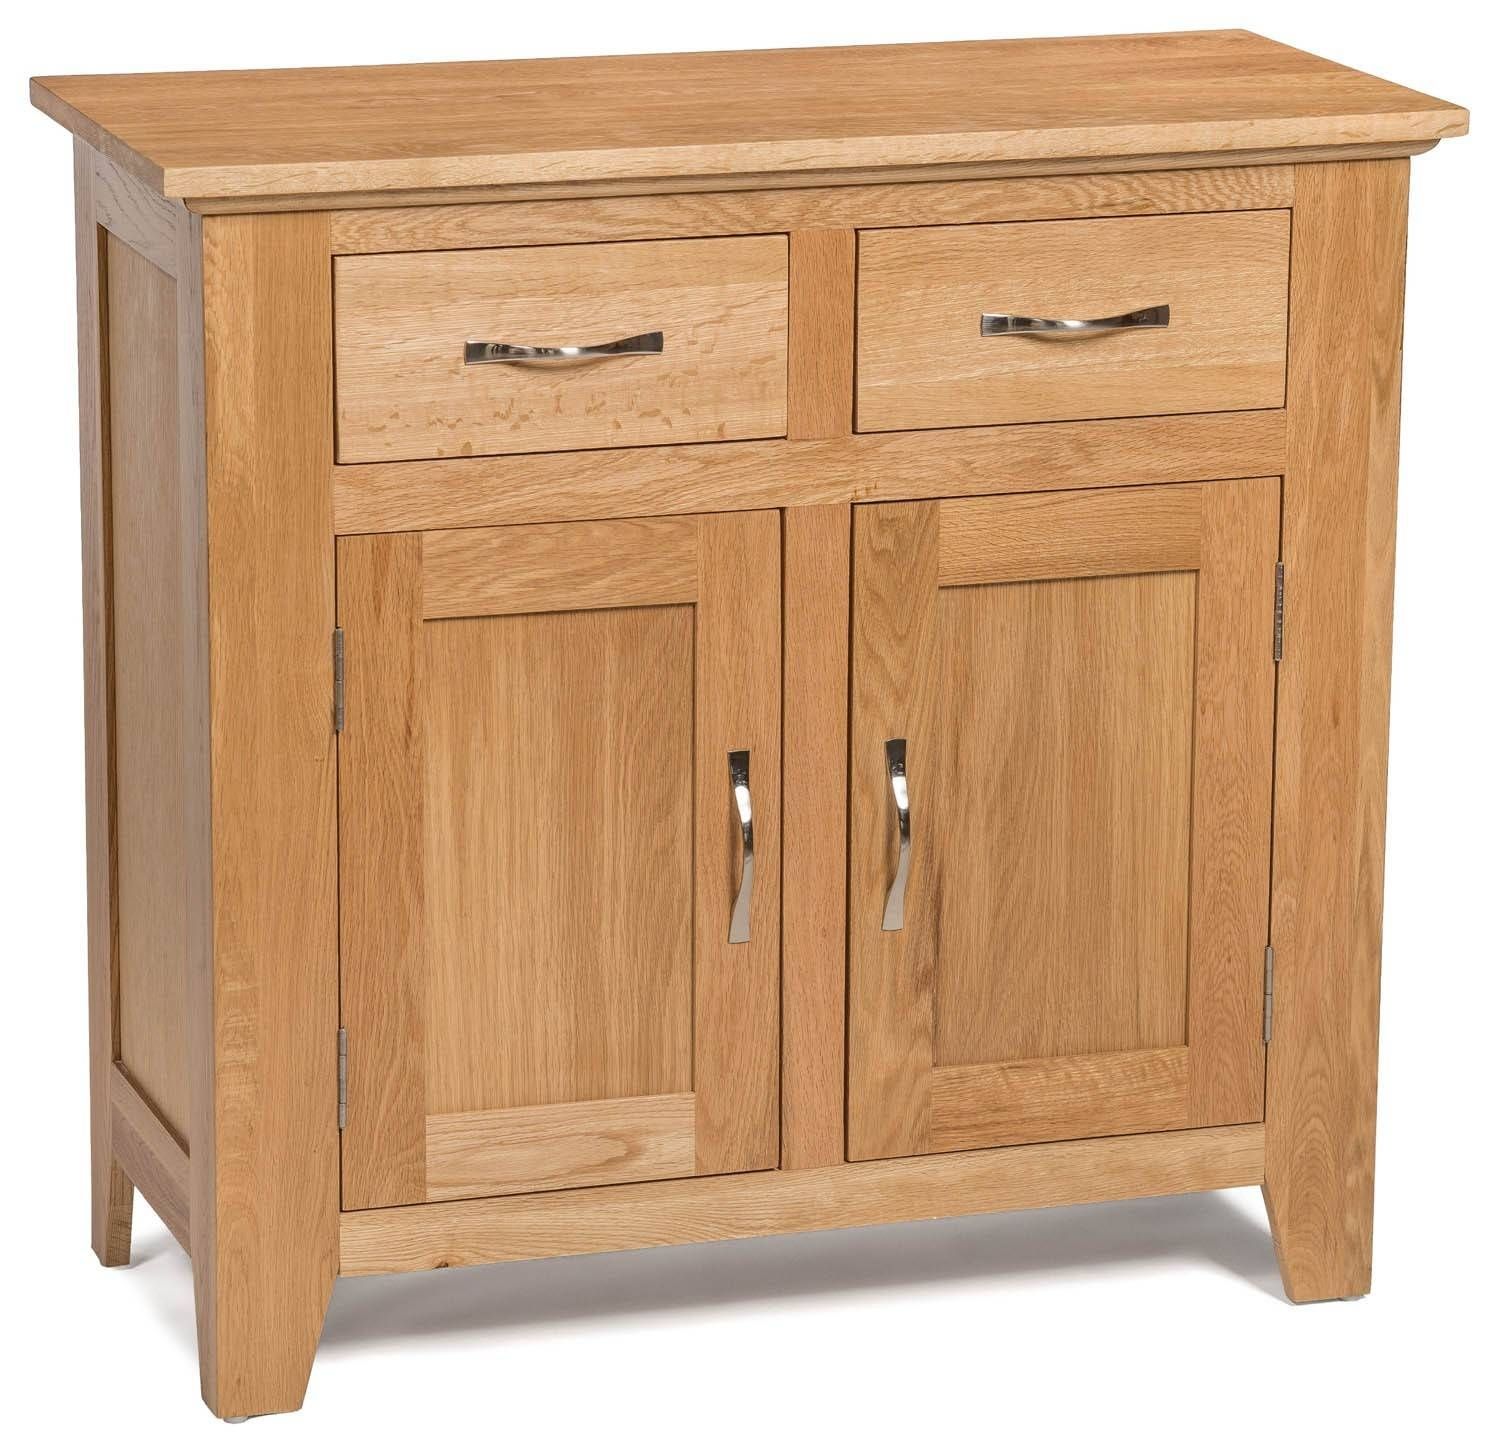 Camberley Oak Small 2 Door 2 Drawer Sideboard – Sideboards & Tops Intended For Best And Newest Small Oak Sideboards (View 8 of 15)